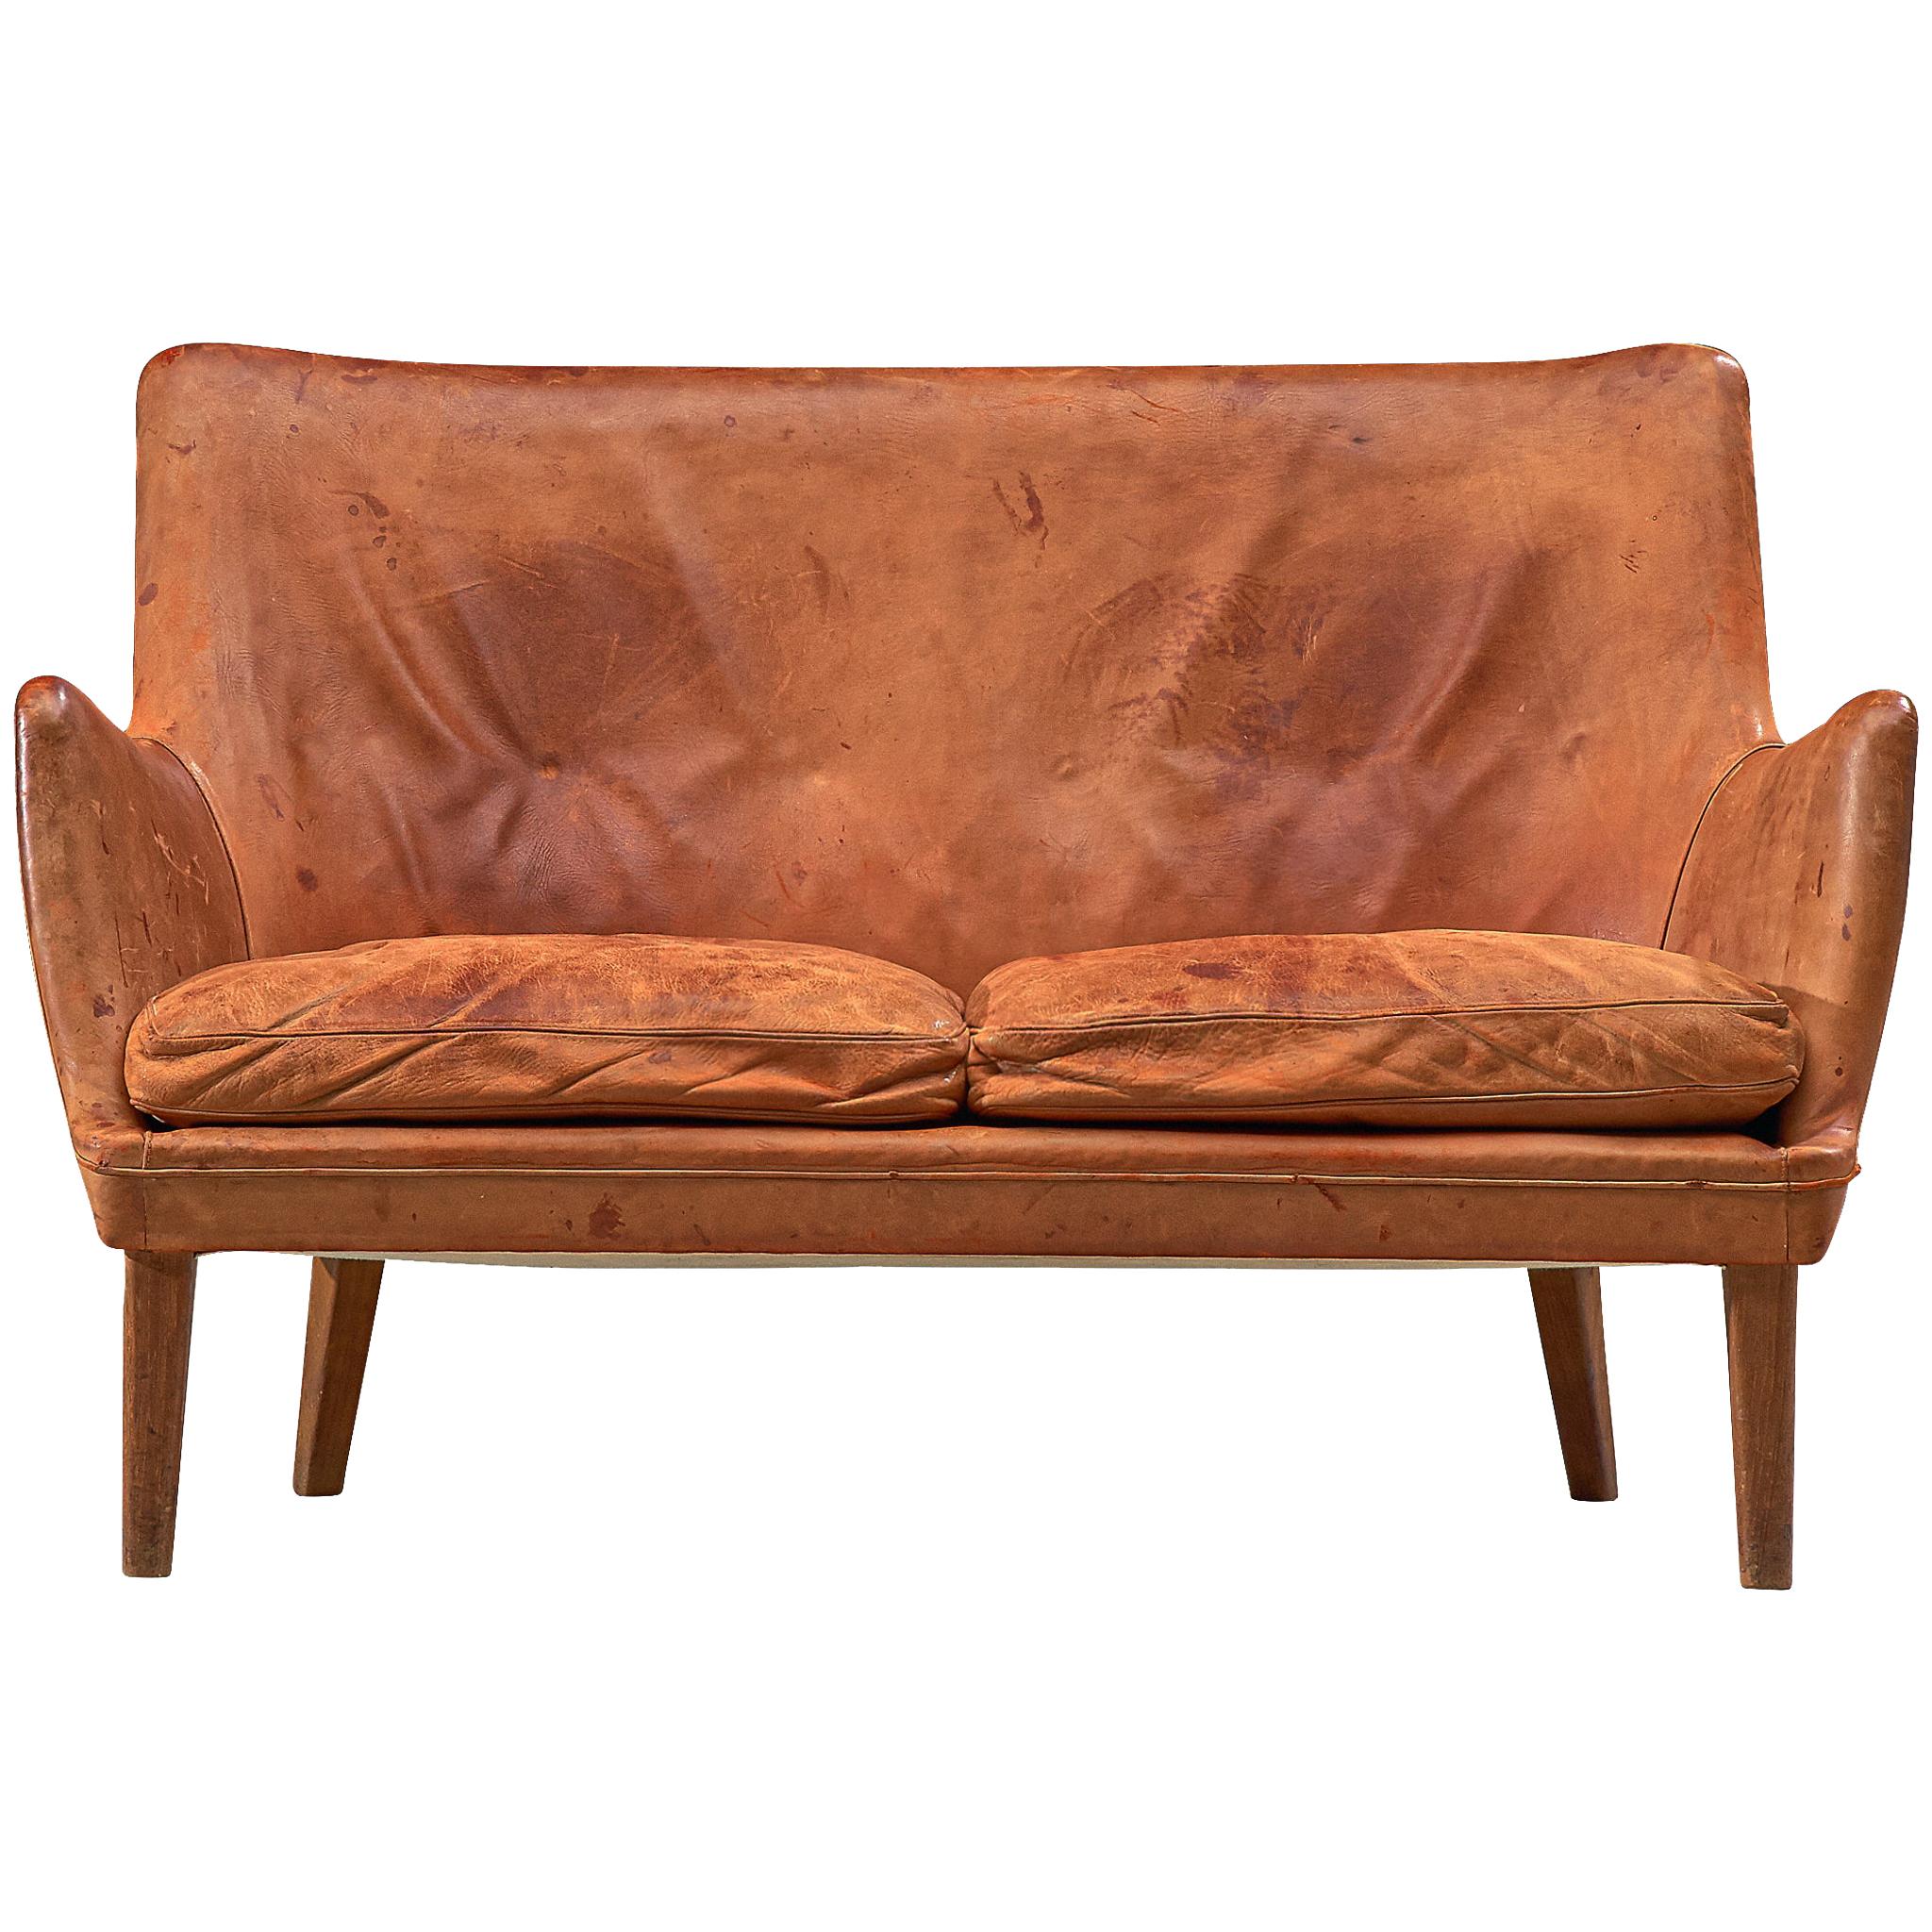 Arne Vodder Settee in Patinated Cognac Leather